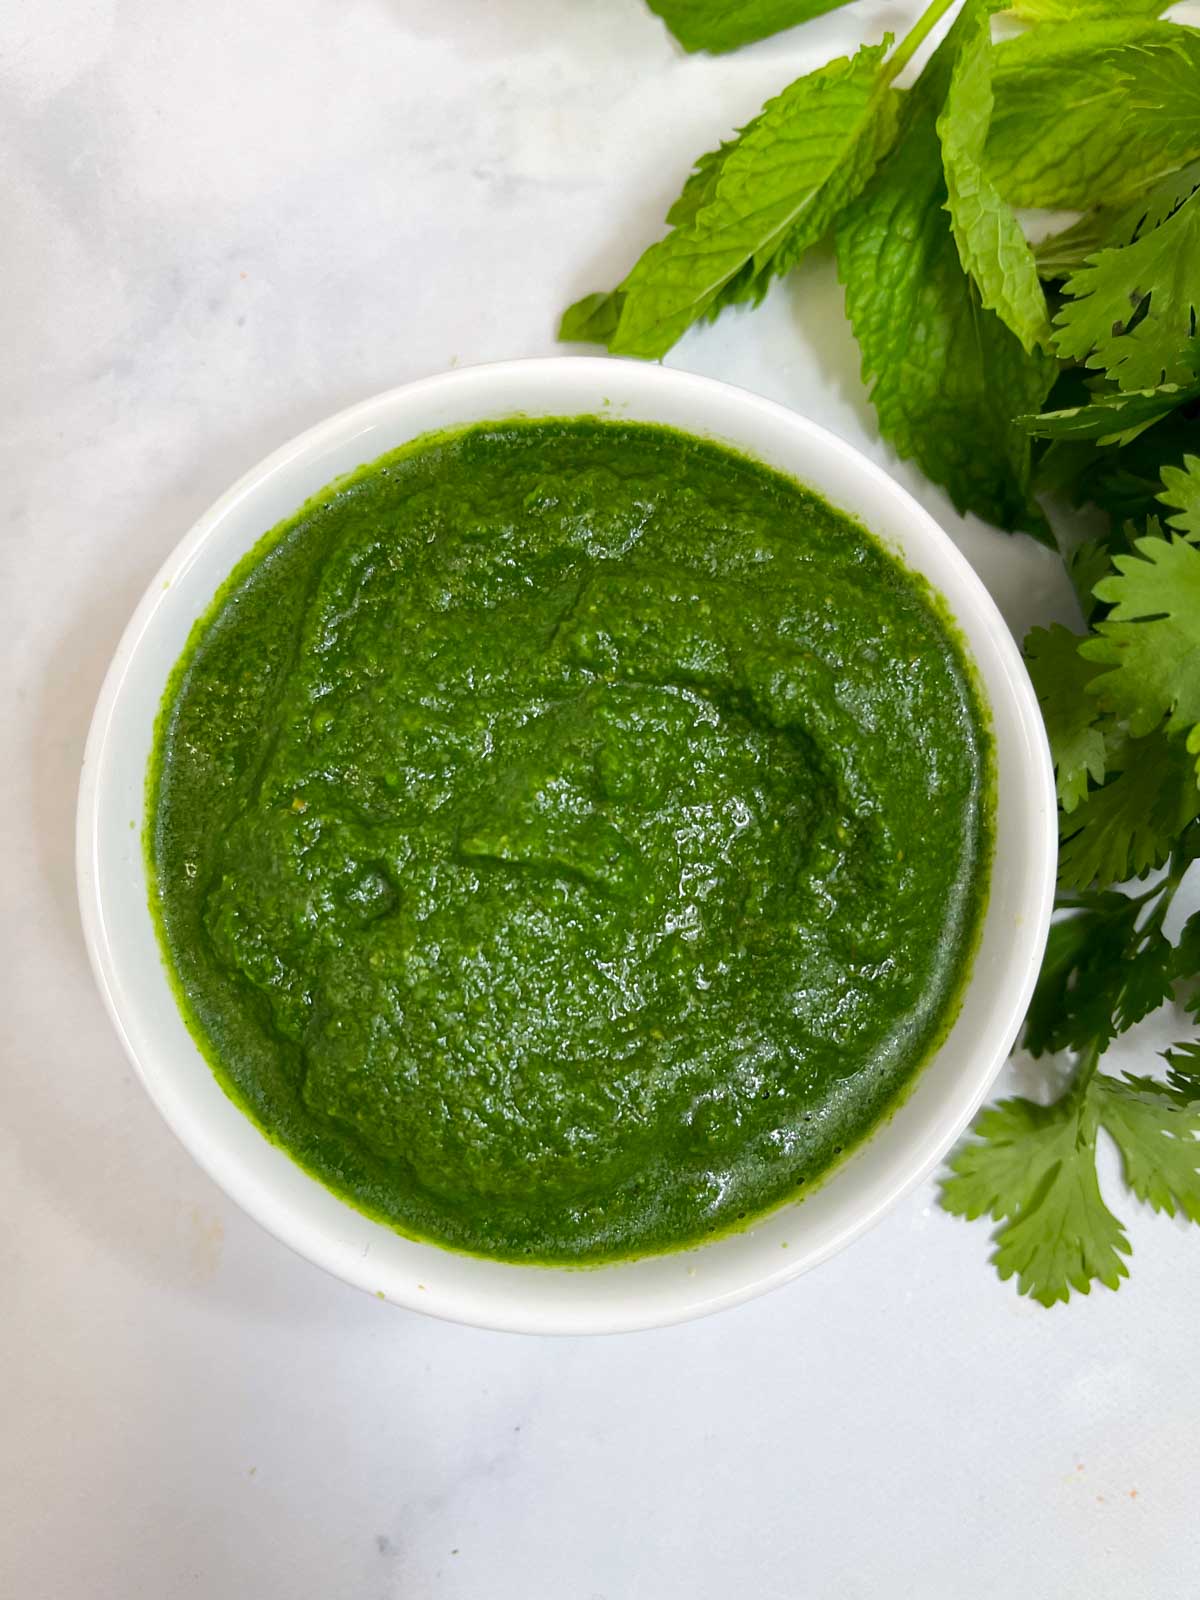 green chutney (coriander mint chutney) recipe served in a bowl with mint and coriander leaves on the side